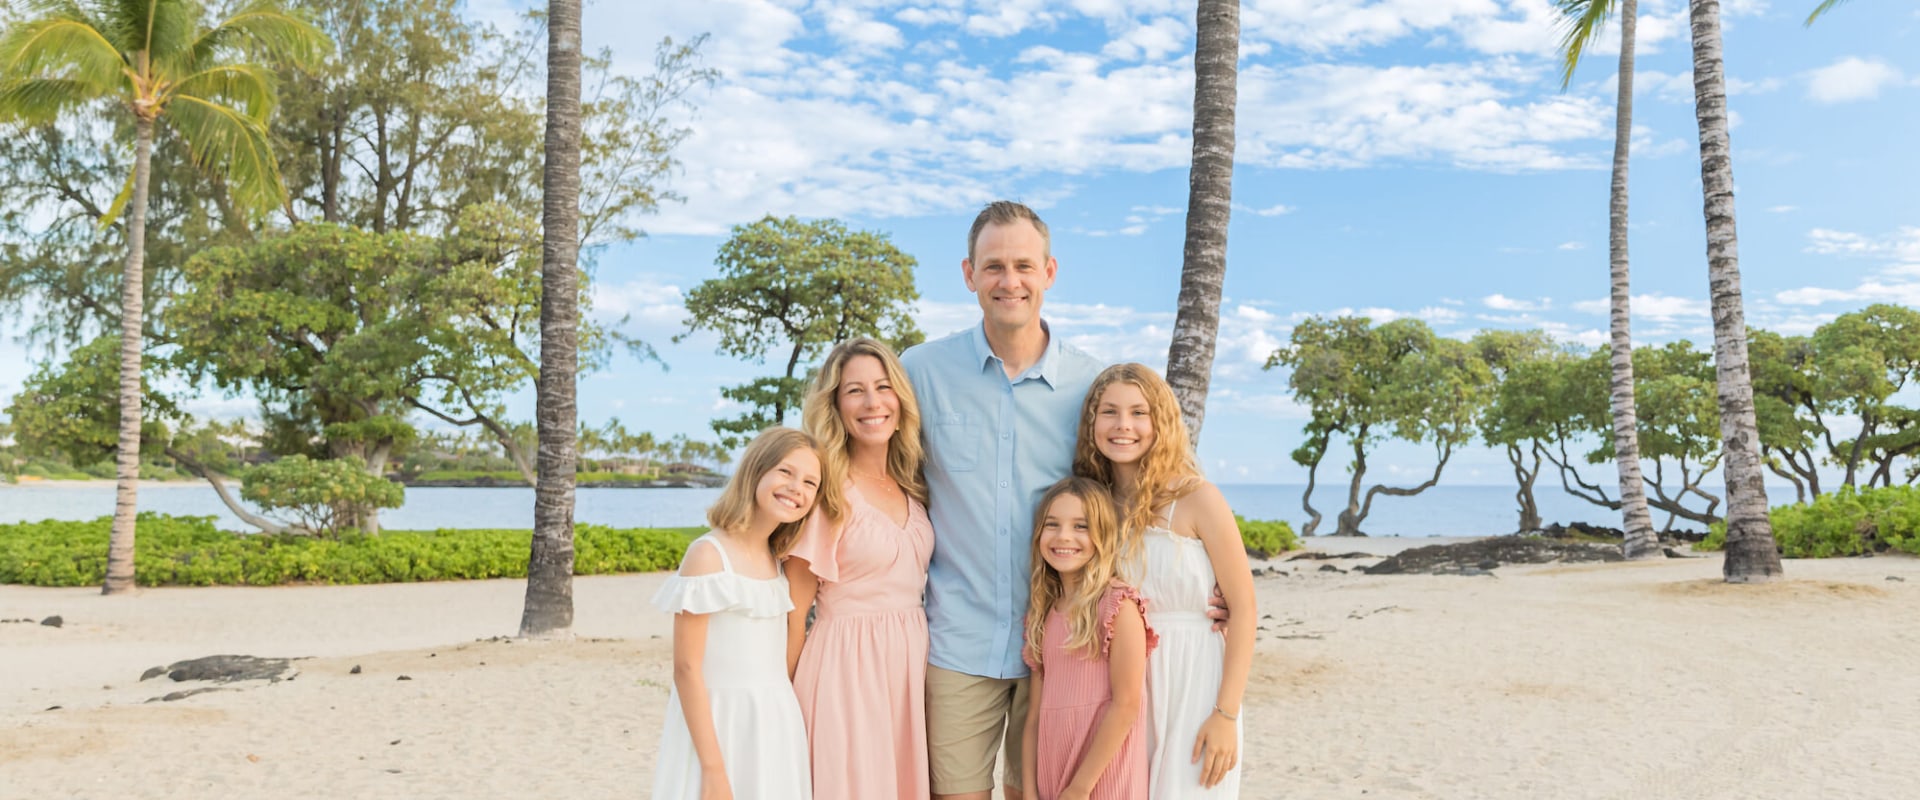 Booking a Photographer for Your Event in Kailua-Kona, Hawaii: What You Need to Know